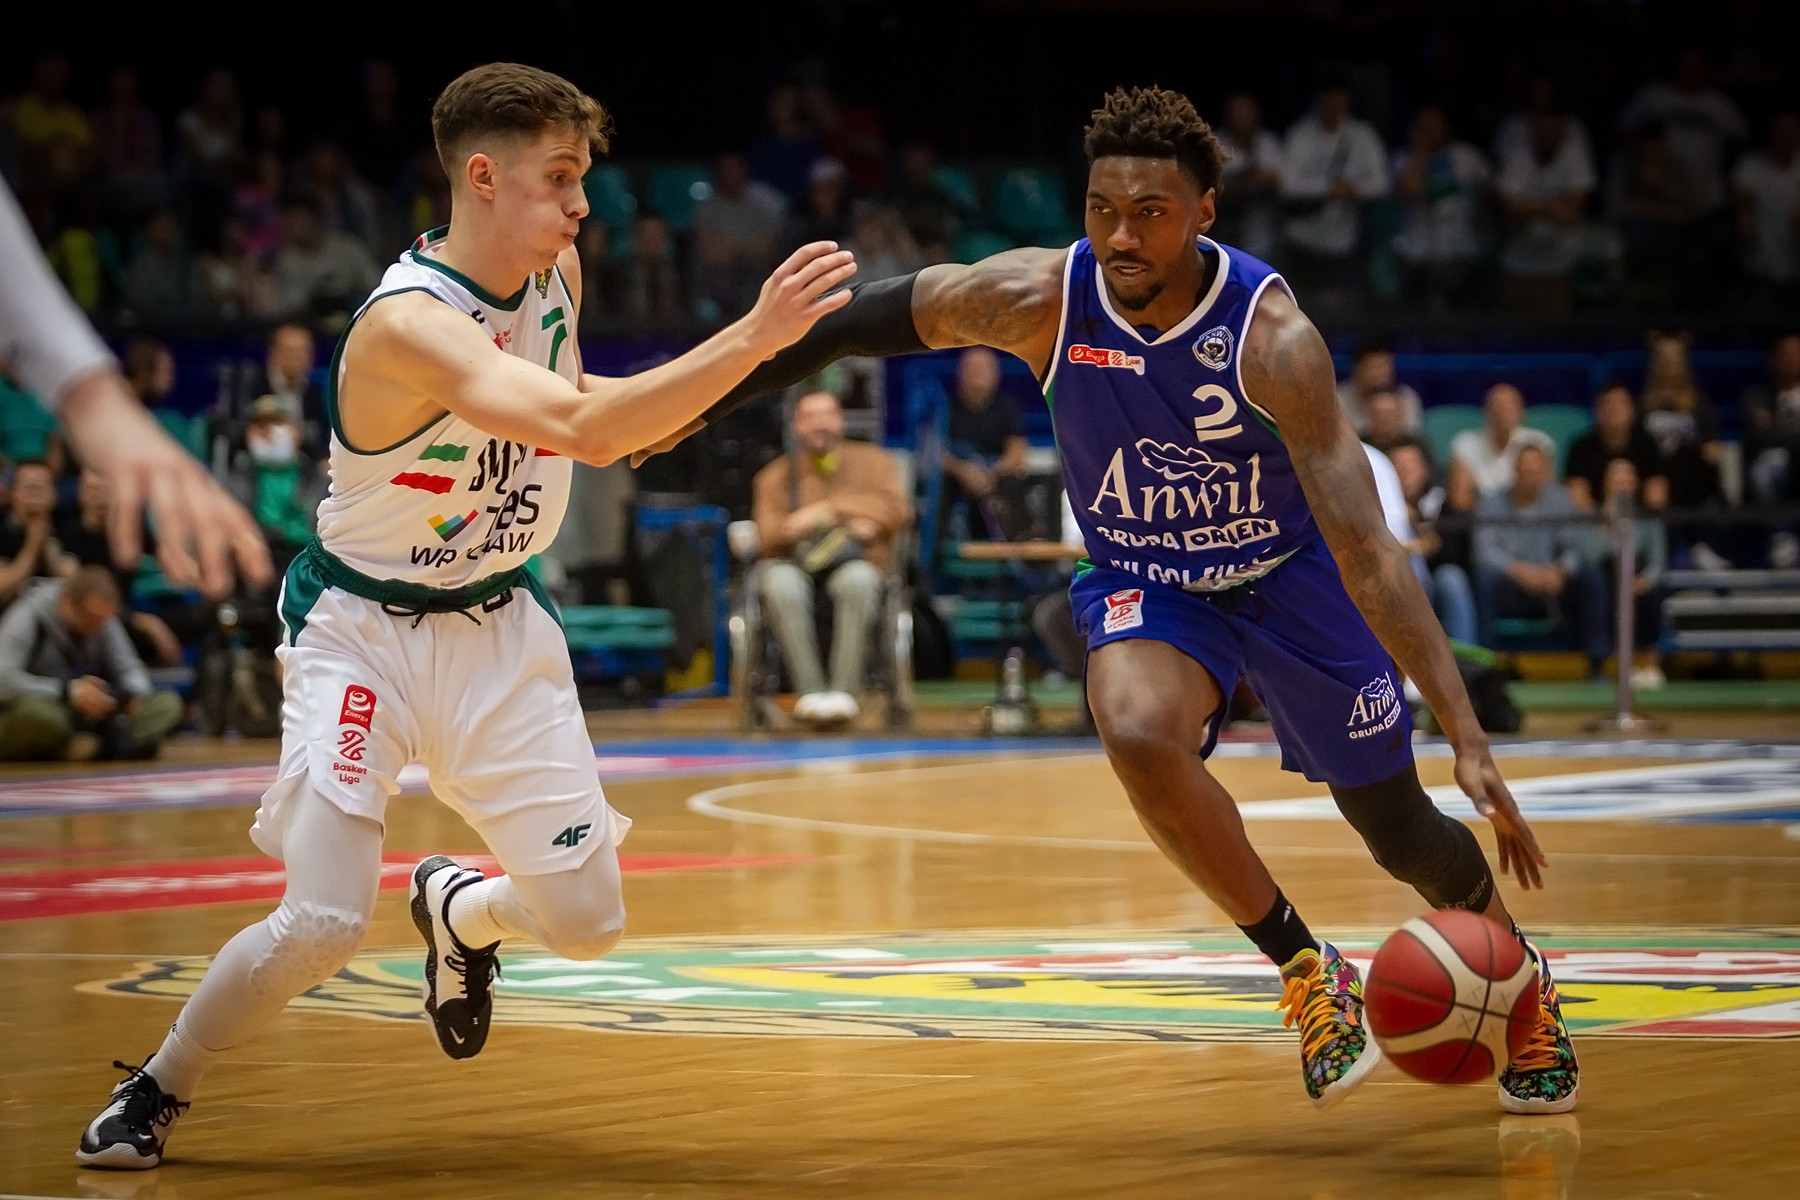 Anwil Wins The War Of Nerves 